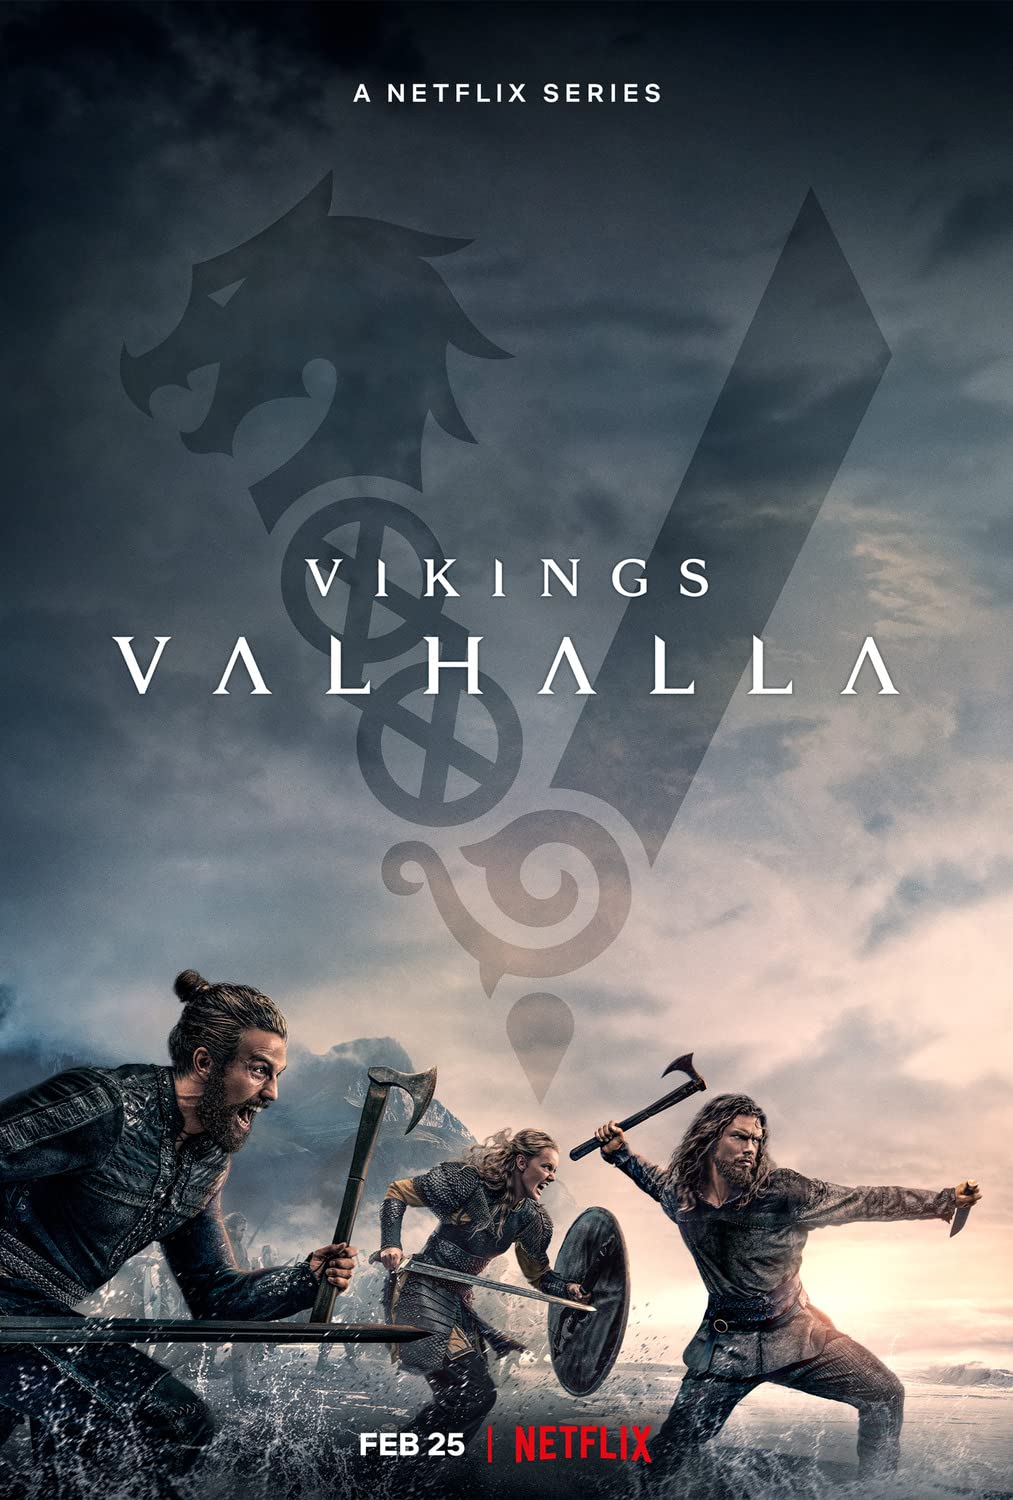 Vikings Valhalla Trailer, Coming to Netflix in February 2022